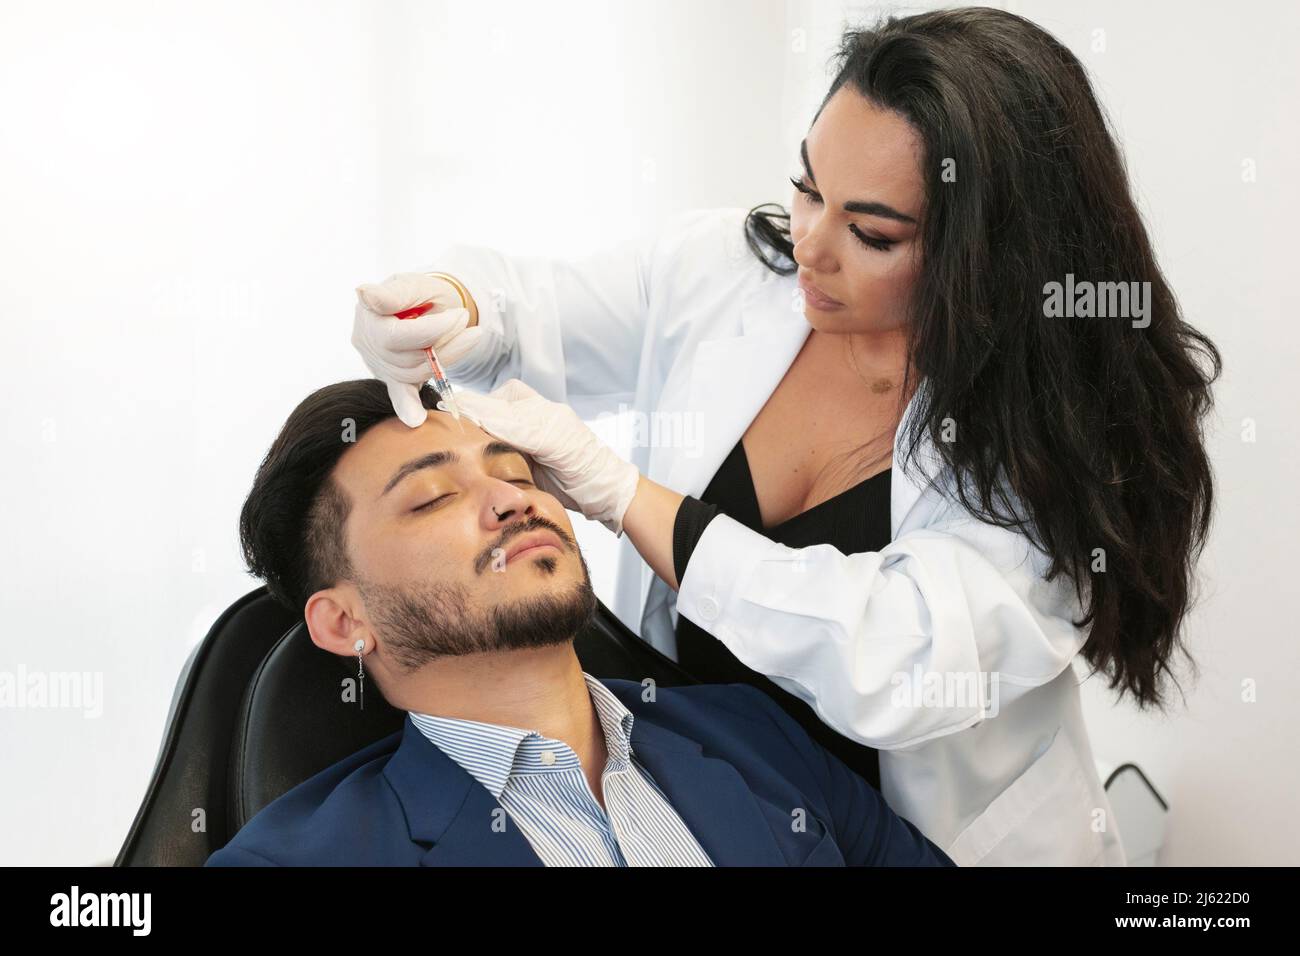 Dermatologist doing botox treatment on patient at aesthetic clinic Stock Photo